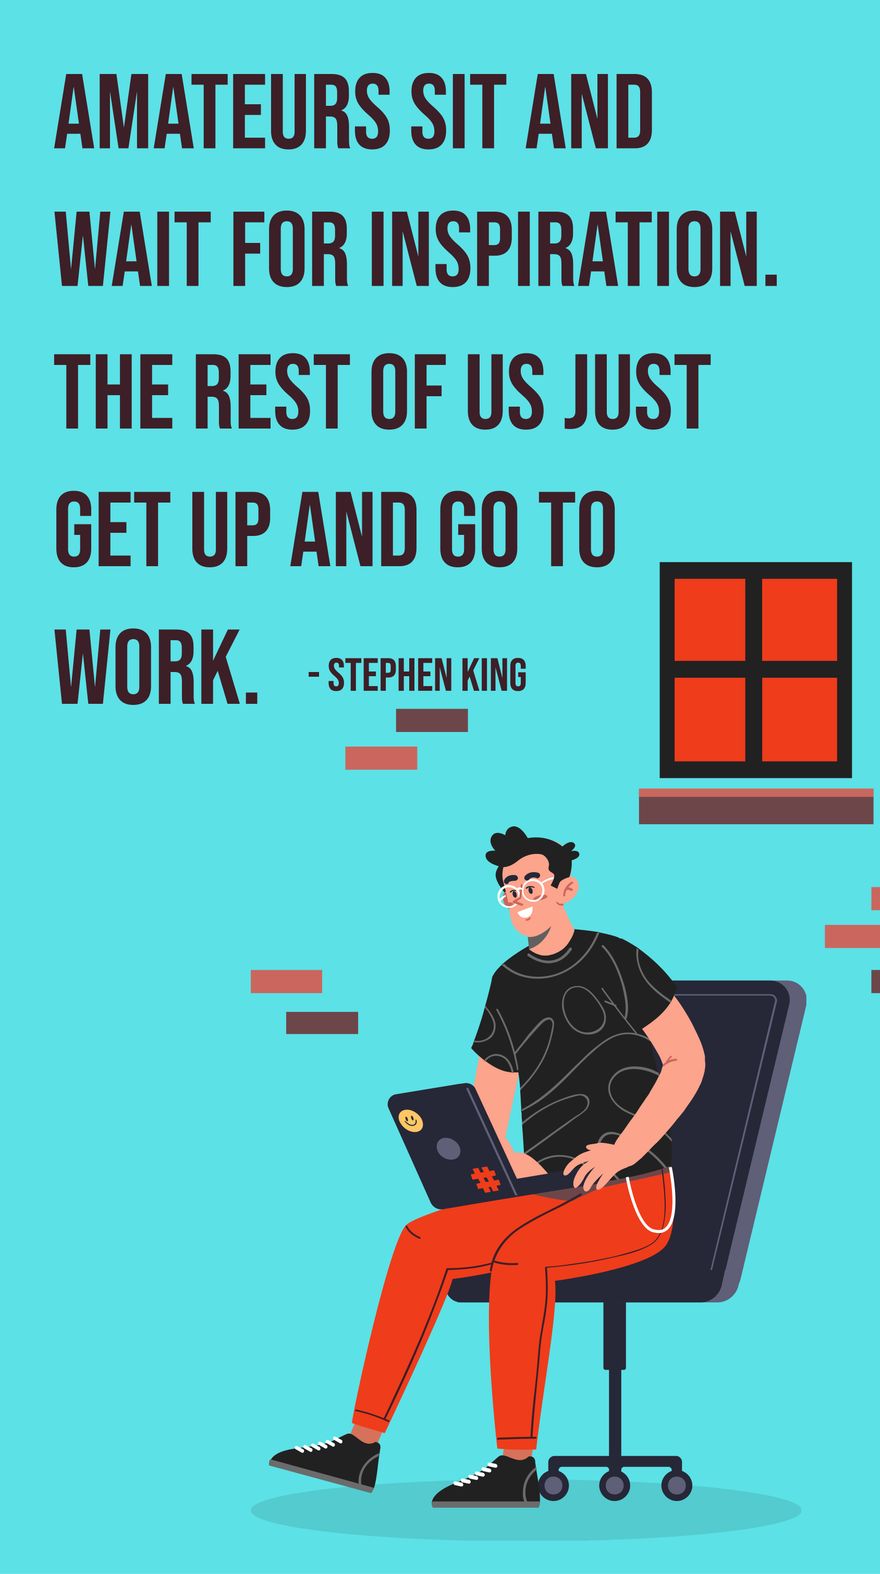 Free Stephen King - Amateurs sit and wait for inspiration. The rest of us just get up and go to work. in JPG